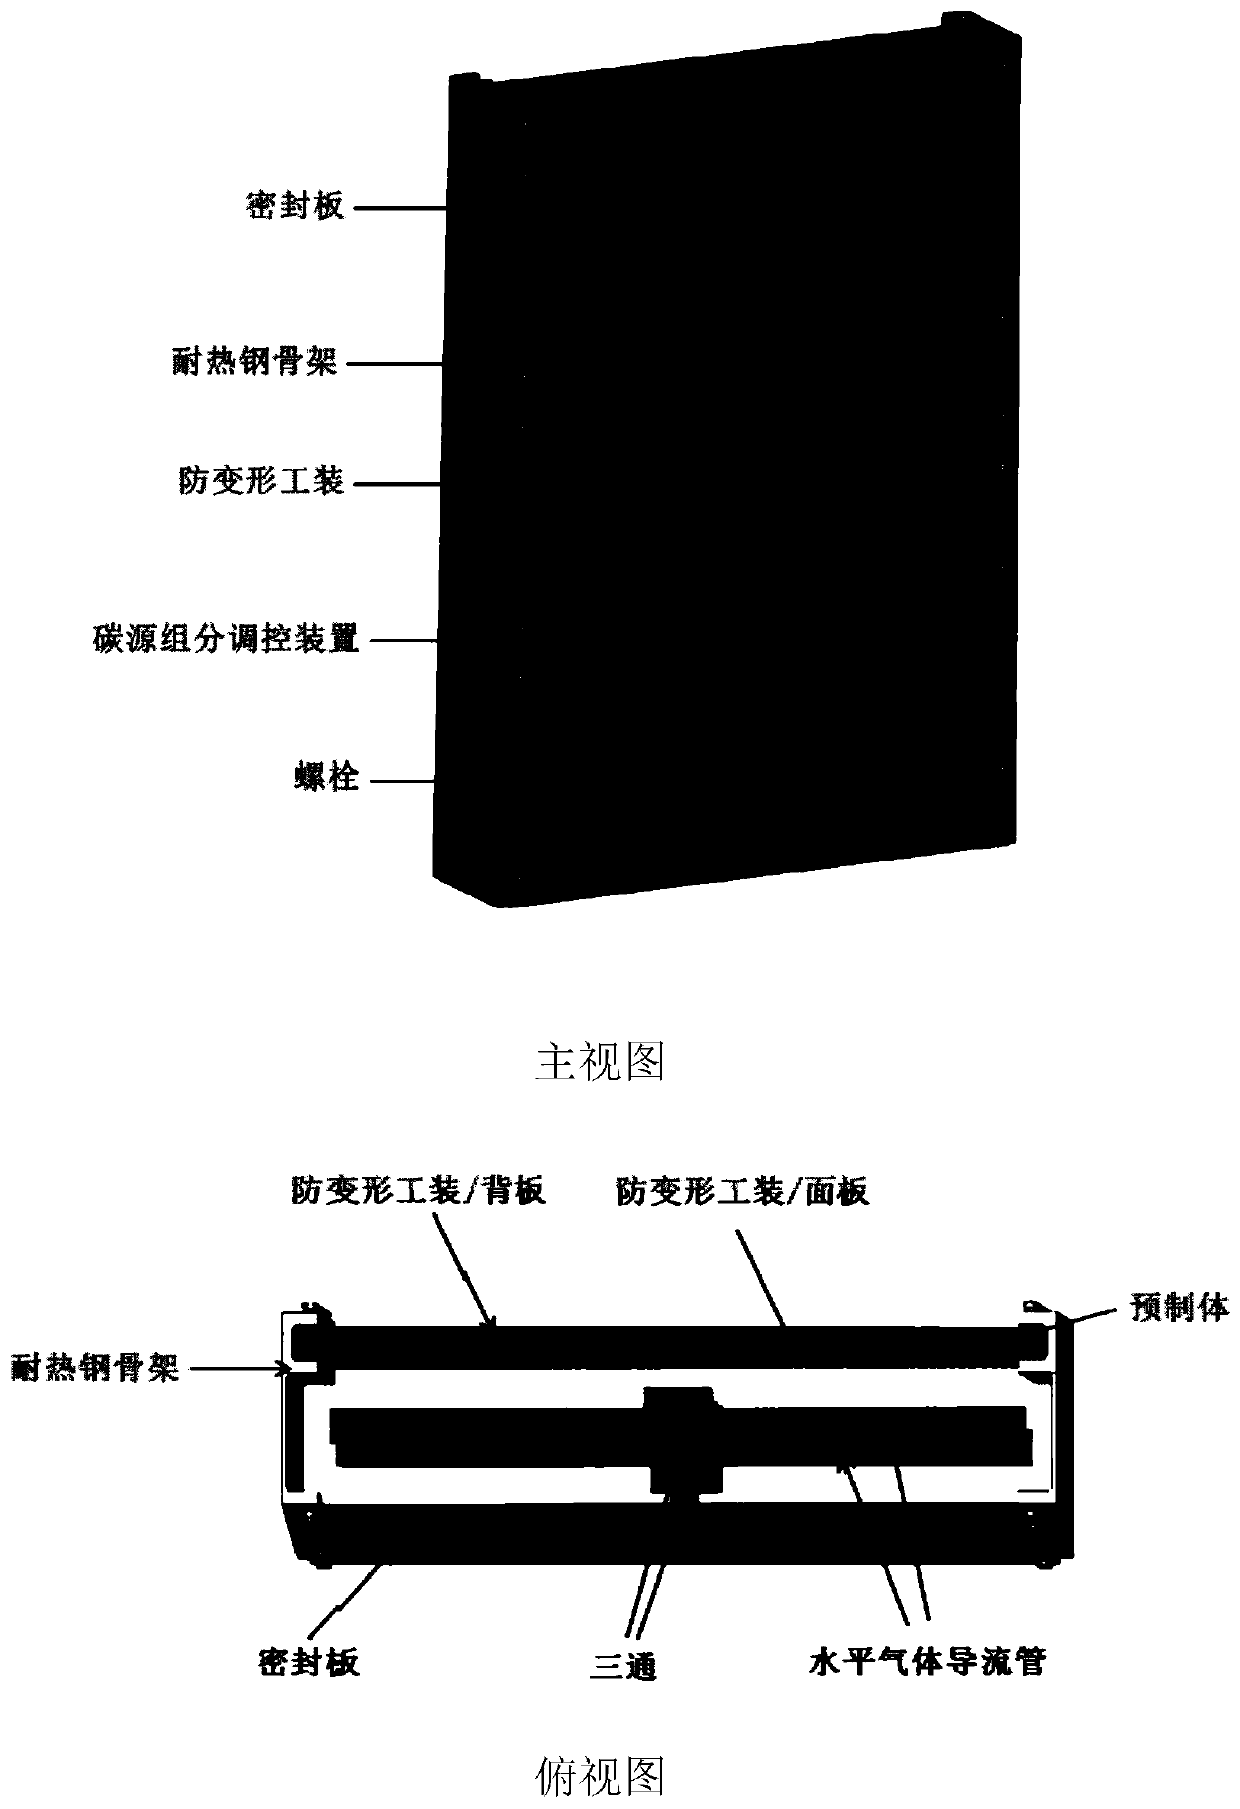 Ultra-large-size carbon/carbon composite material sheet and equipment for preparing the same